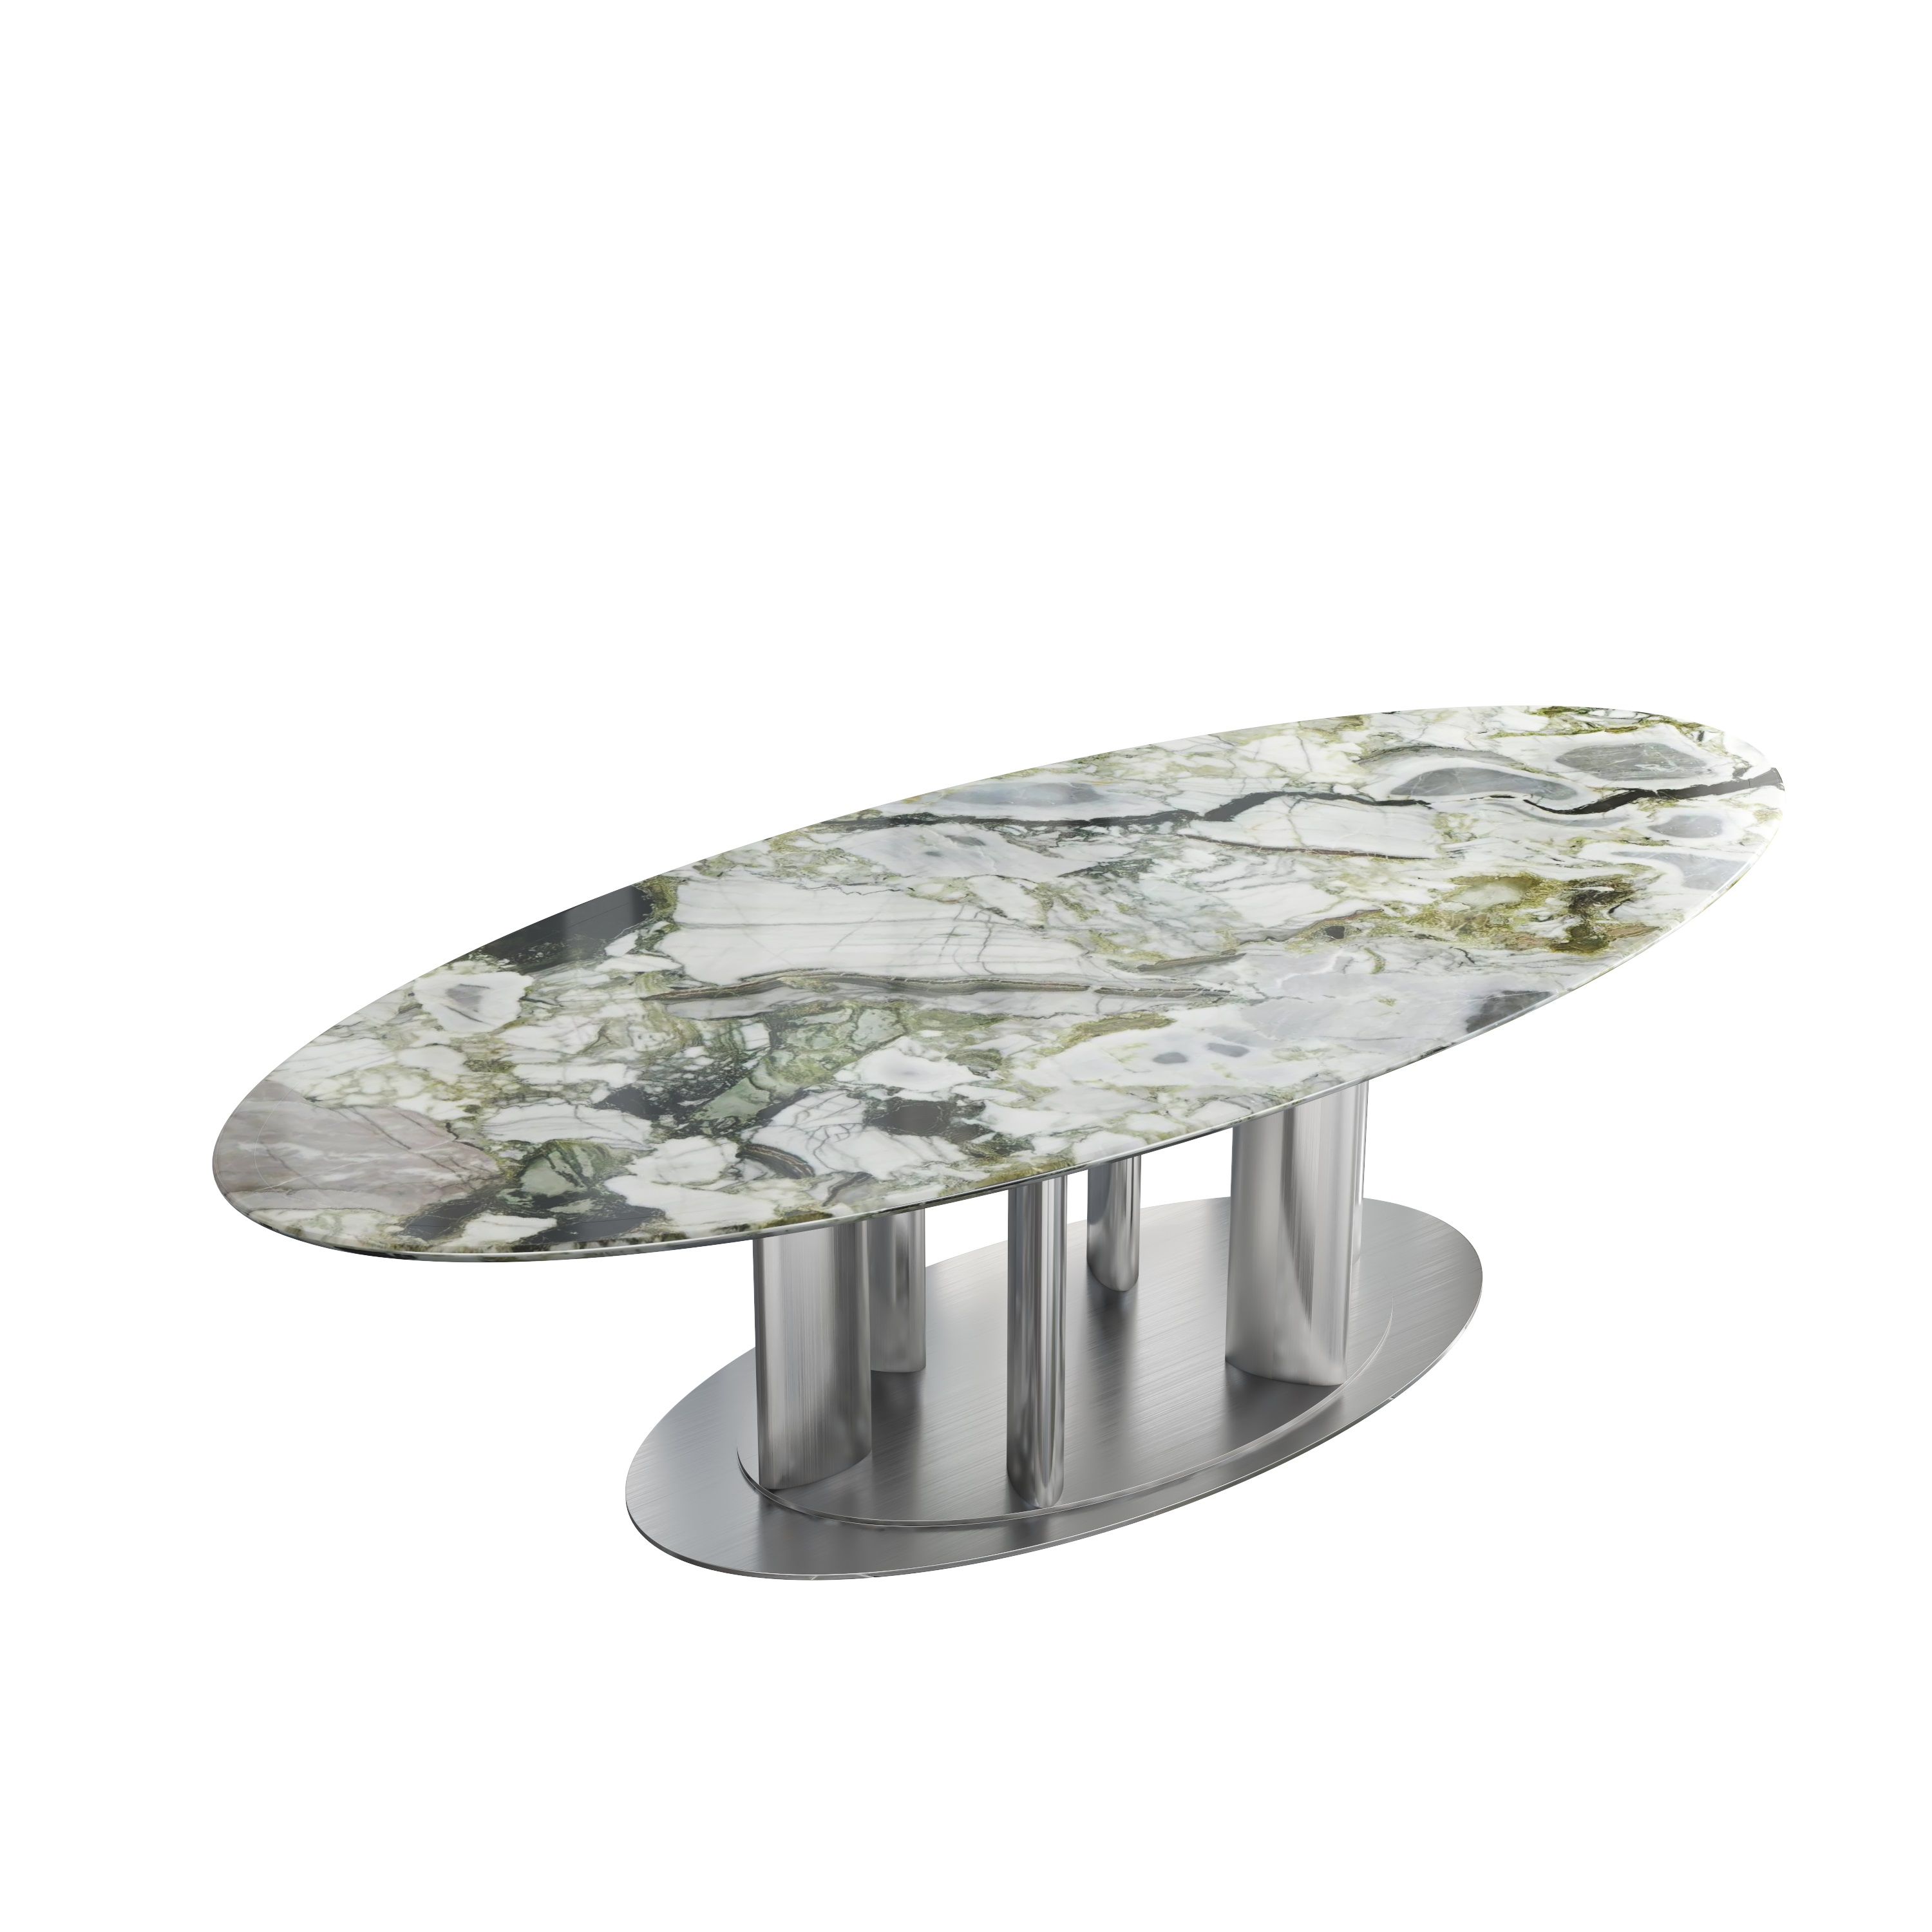 Green emerald oval dining table